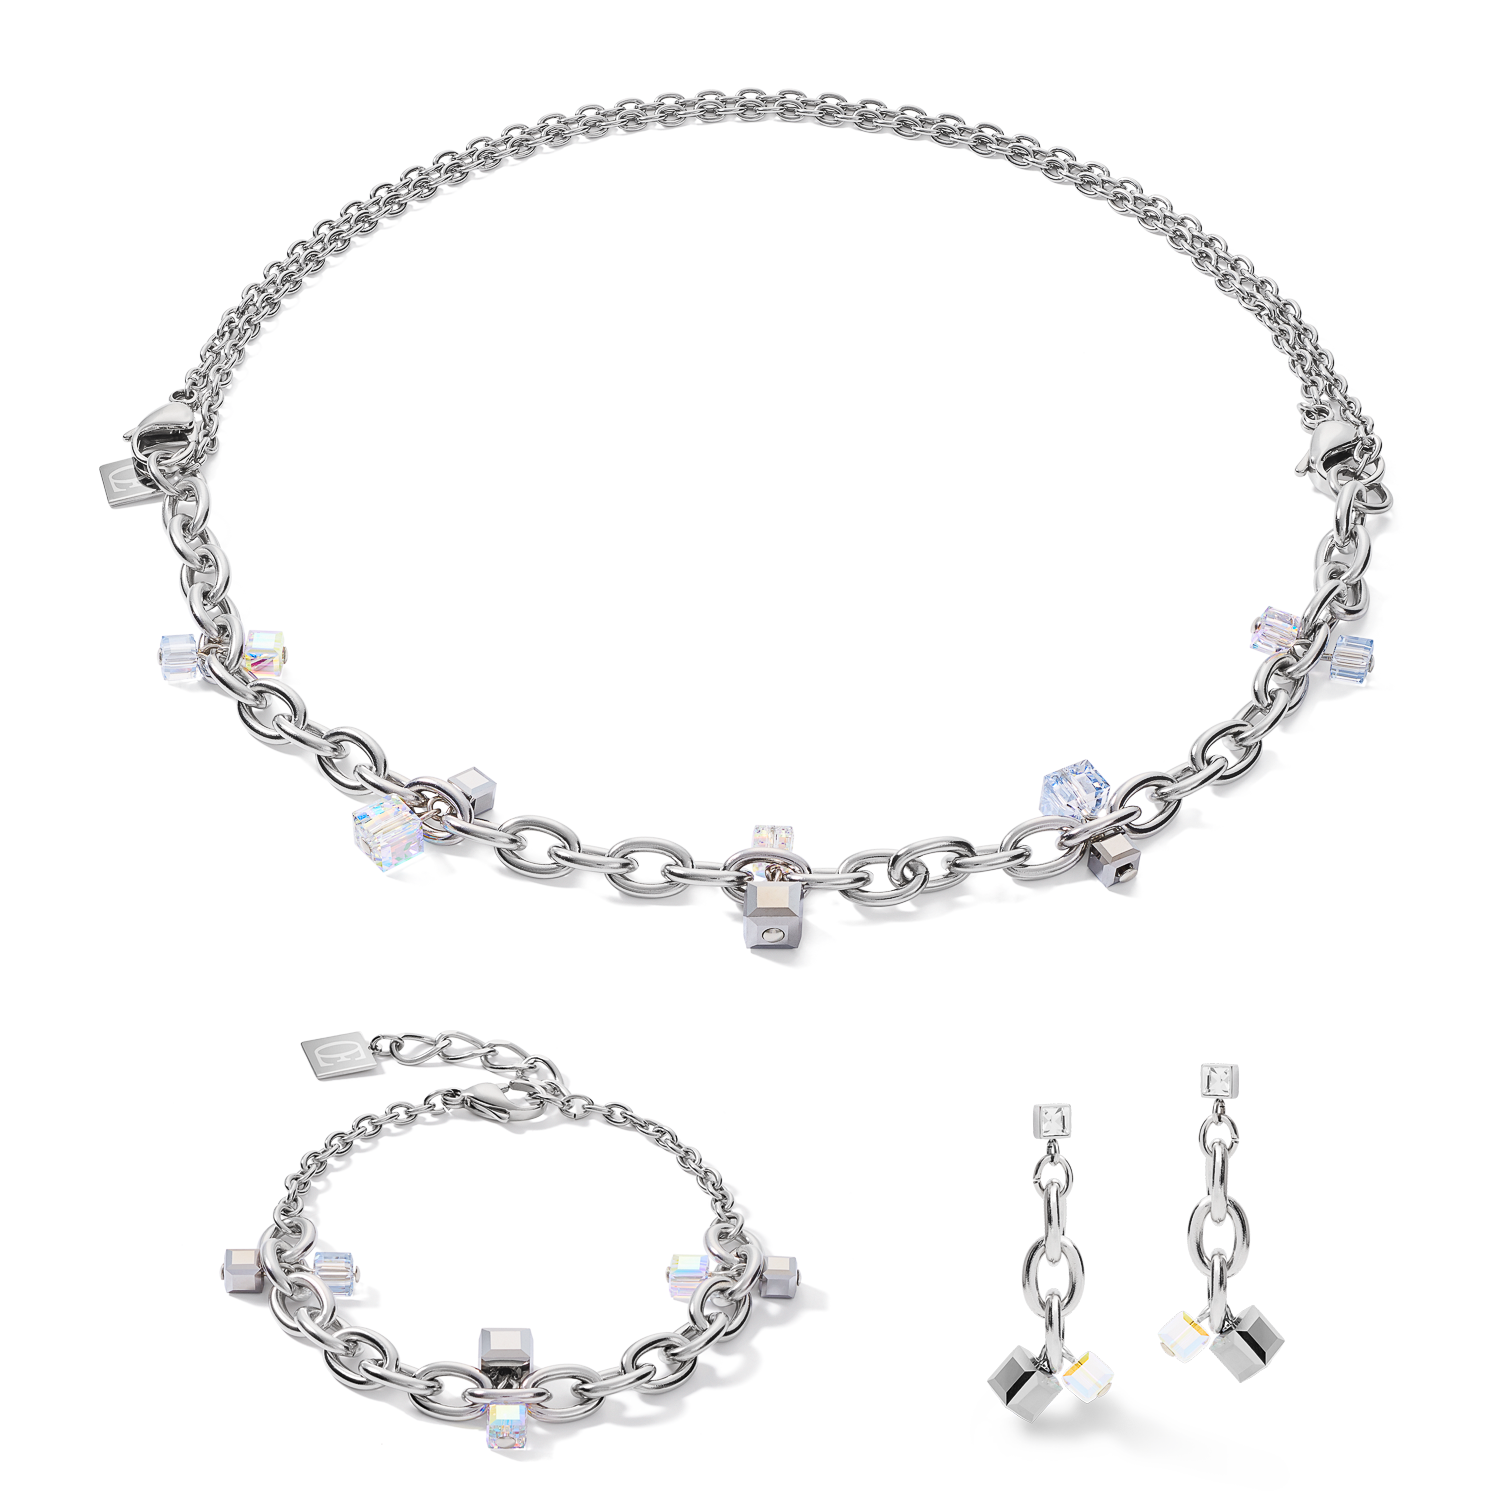 Necklace casual & chunky chain stainless steel & Crystals silver-crystal